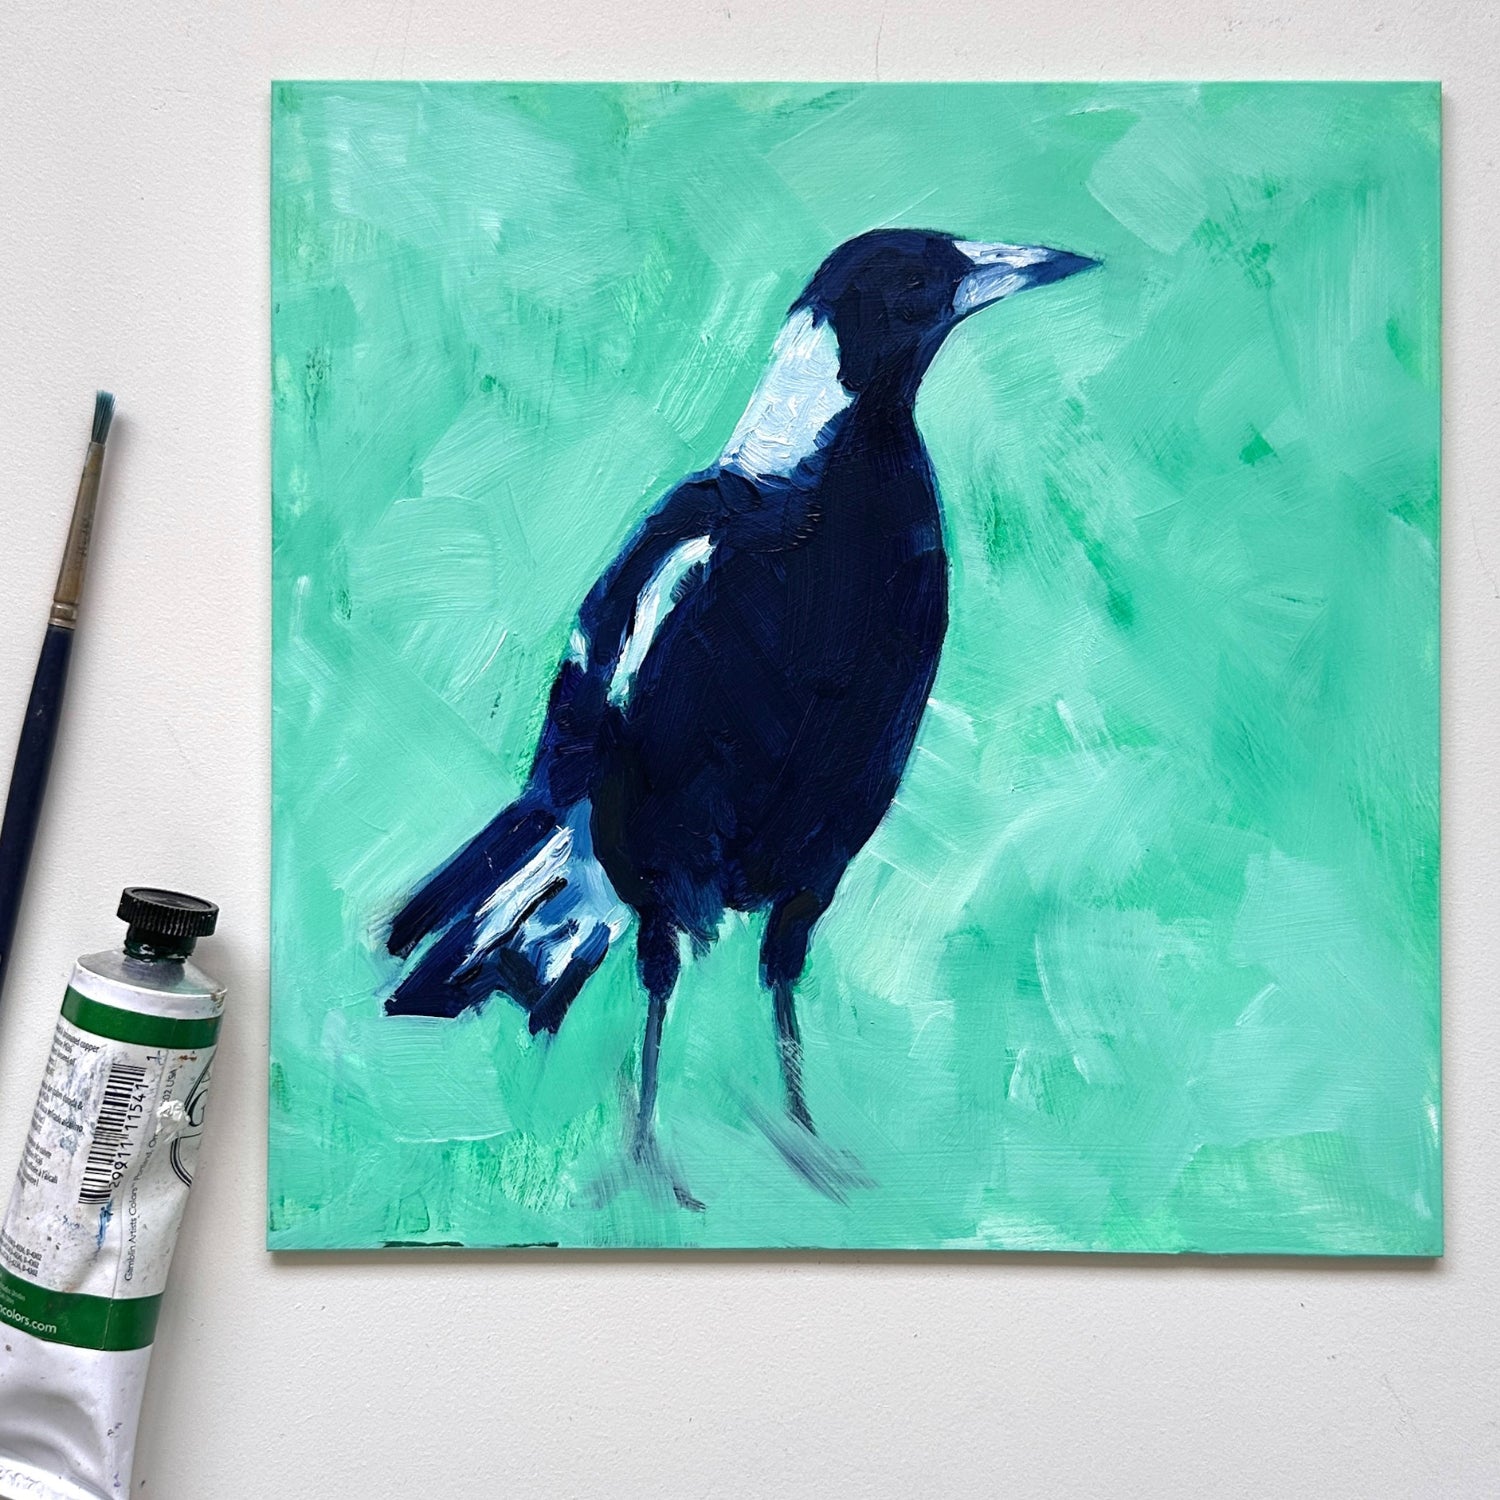 lifestyle photo of an original oil painting of a navy blue and white magpie on a textured minty green background. the painting is on a white desk and there is a paintbrush and oil paint tube next to it